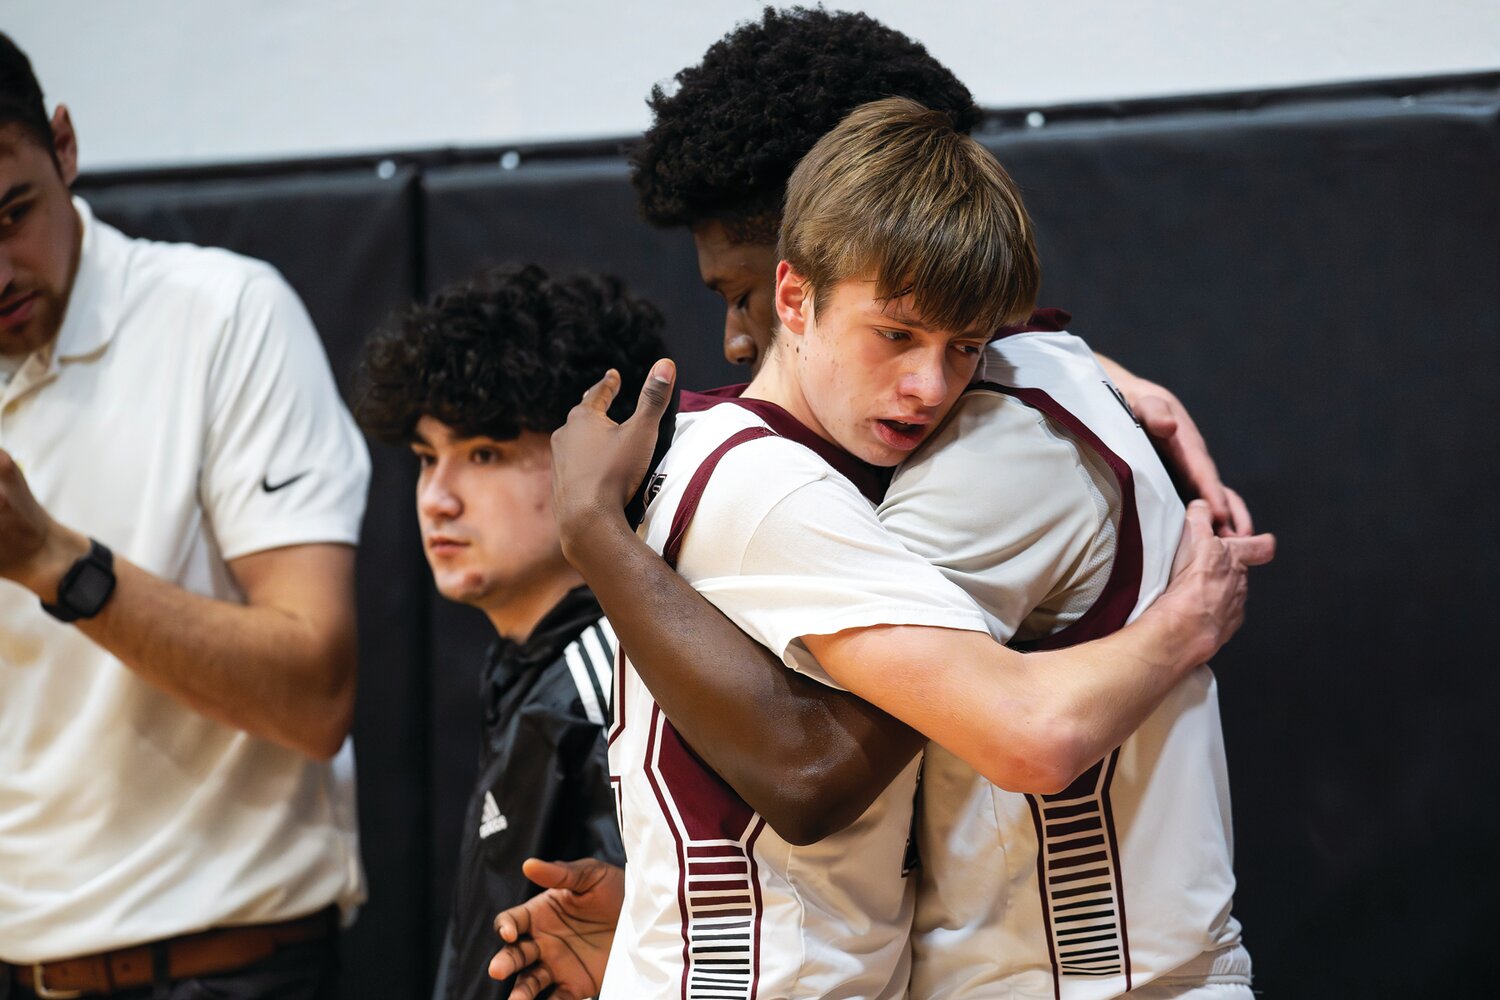 Faith Christian Academy’s Paul Leisner gets a hug from teammate Matt Calixte after being taken out for the last time late in the fourth quarter.